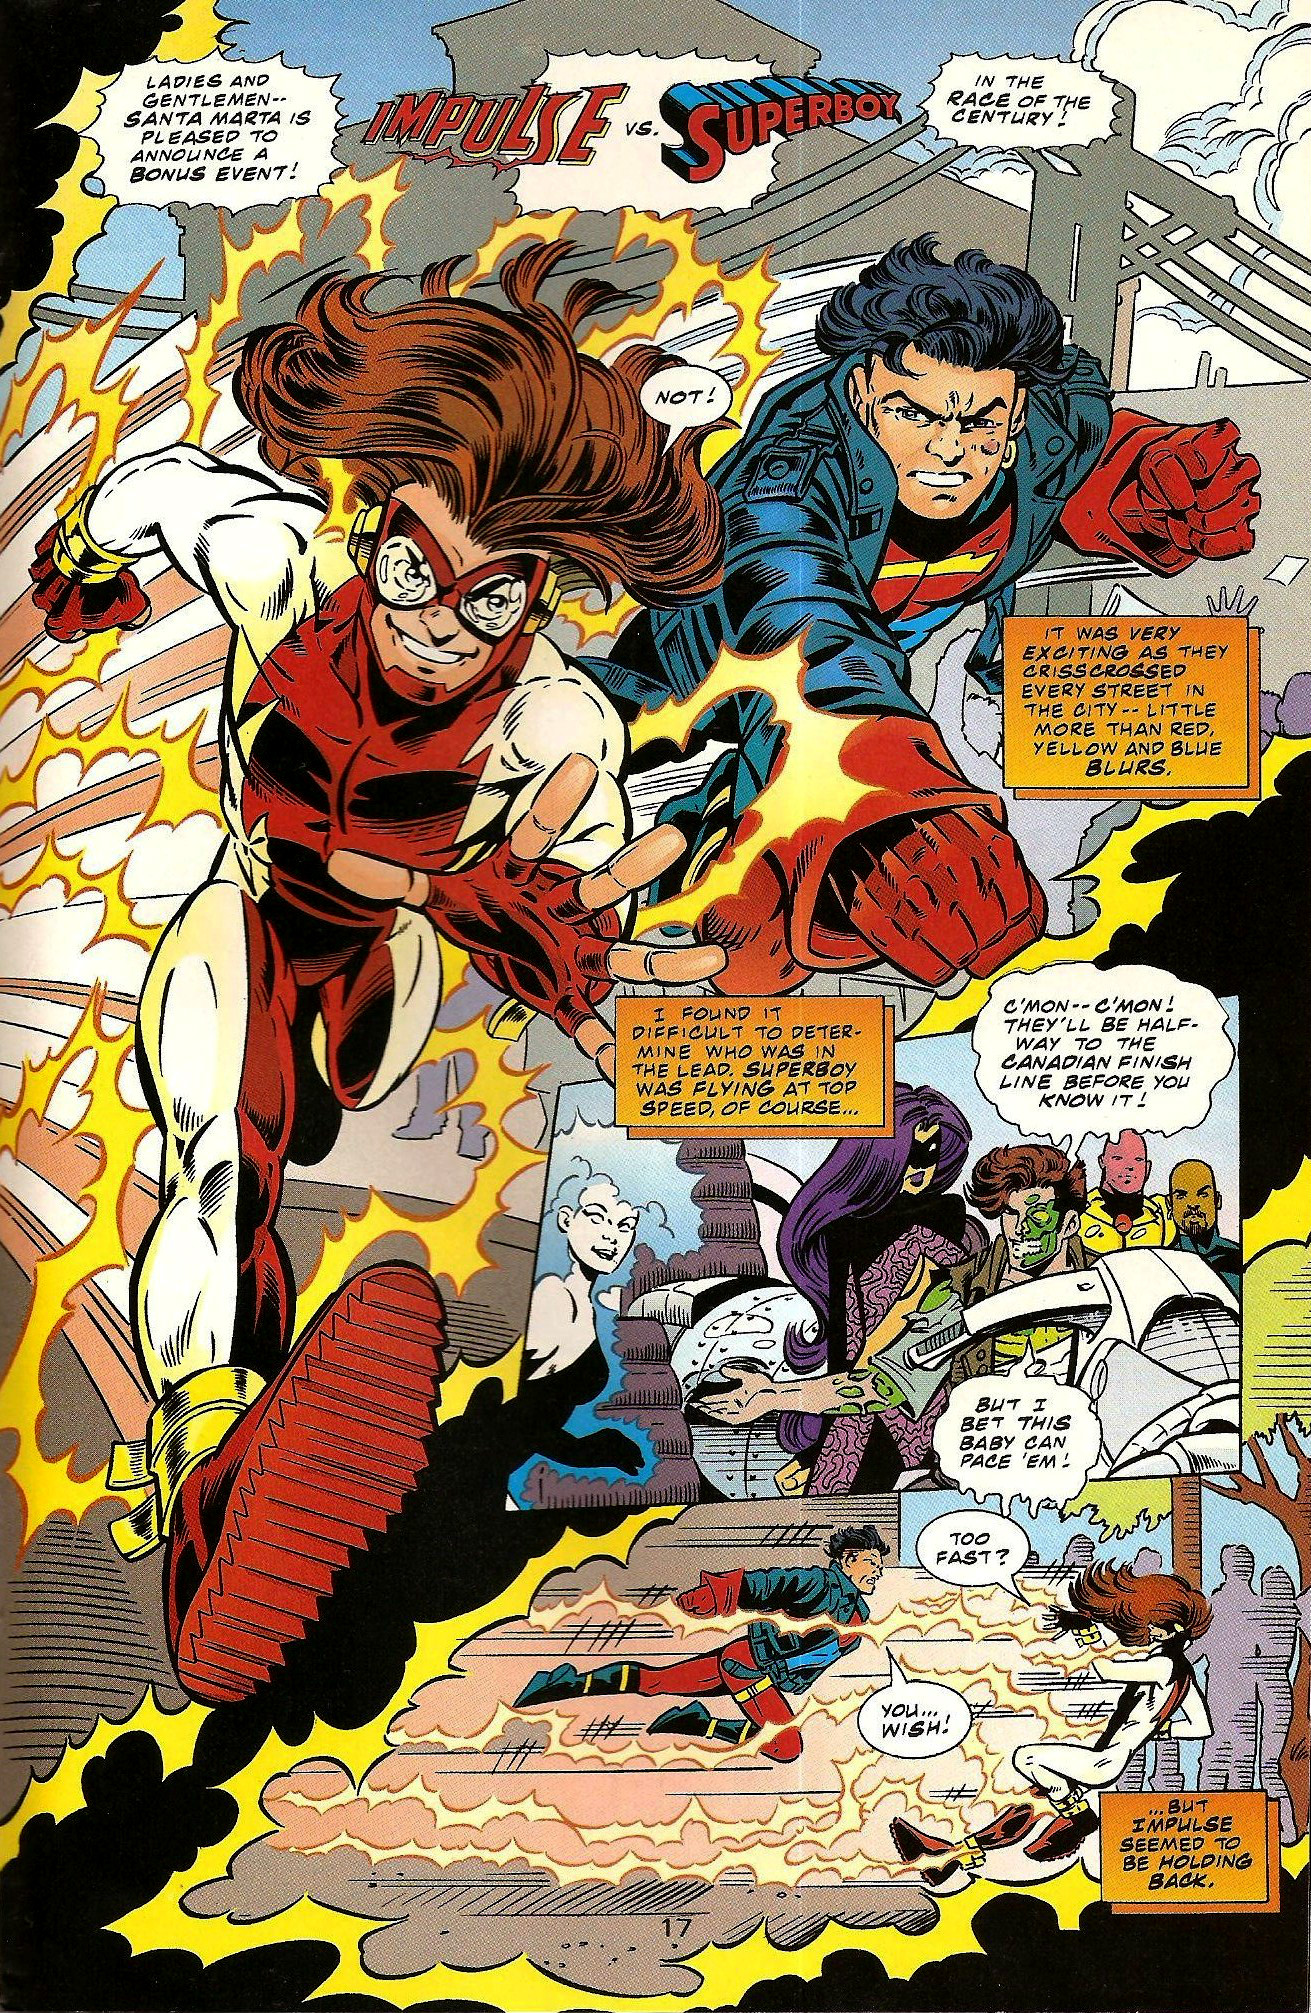 From Superboy and the Ravers #7 (1997)